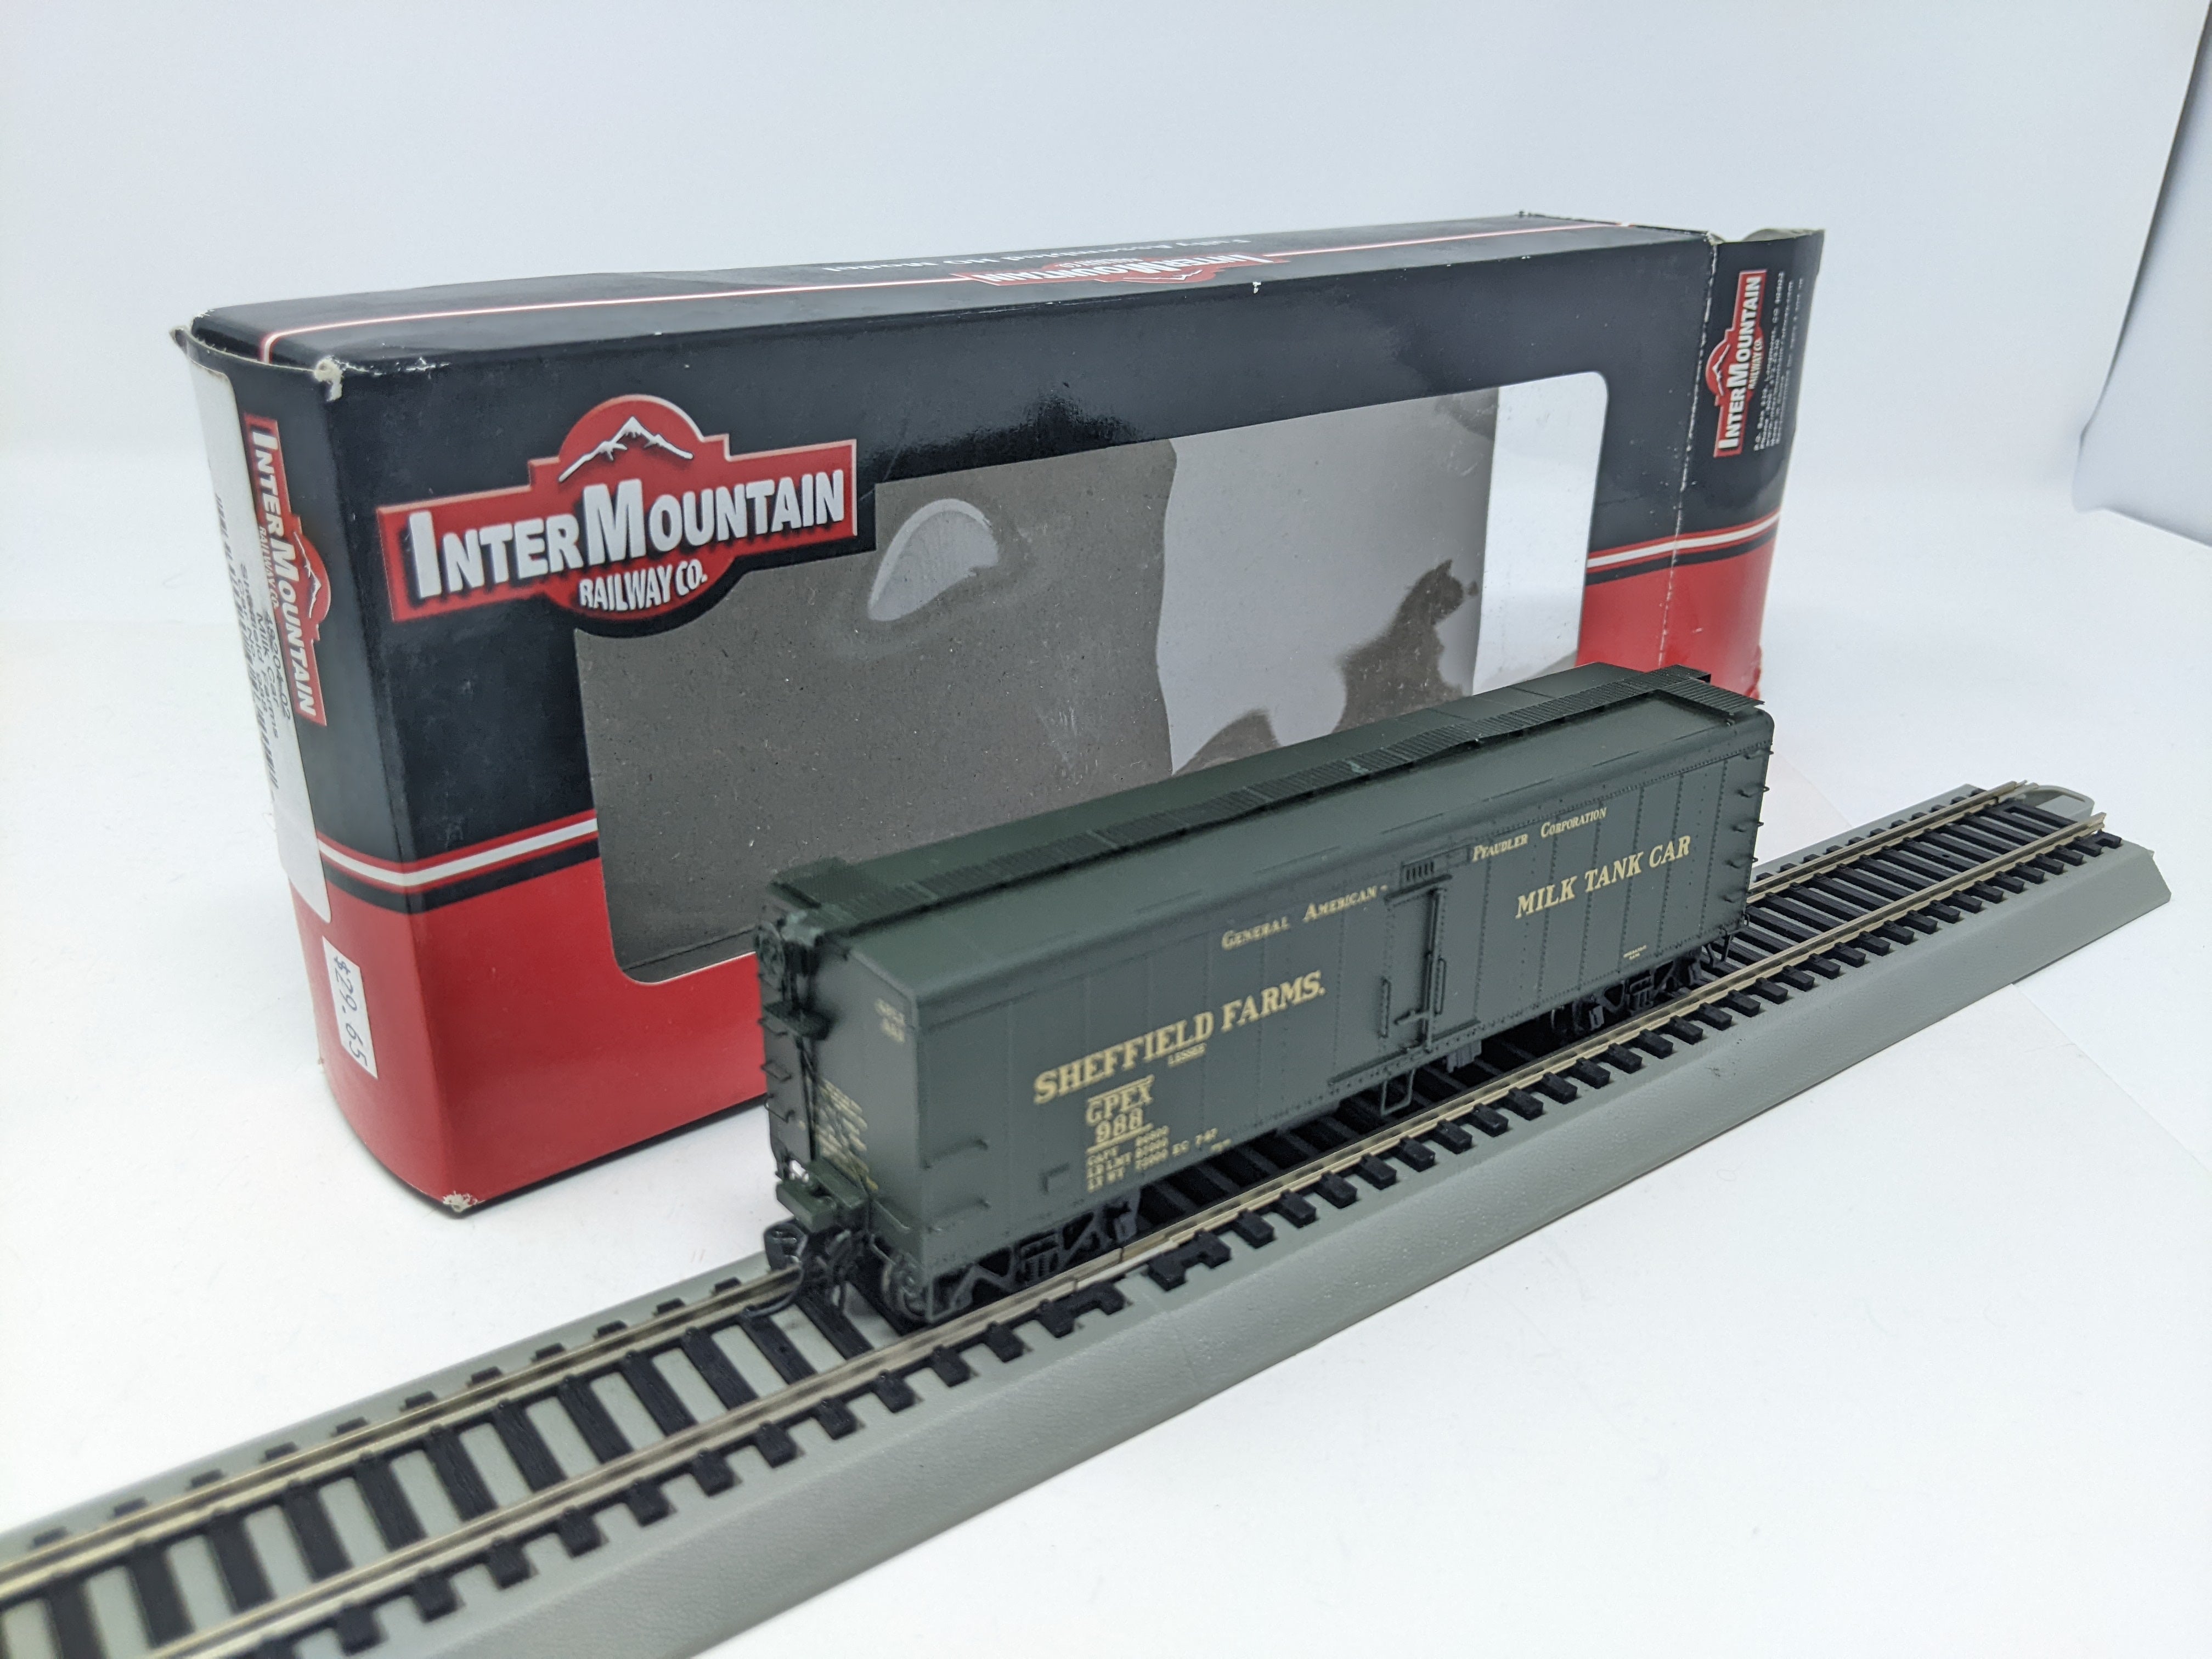 USED Intermountain 48204-02 HO Scale, 40' Milk Tank Car, General American Pfaudler Corp GPEX #988, Sheffield Farms